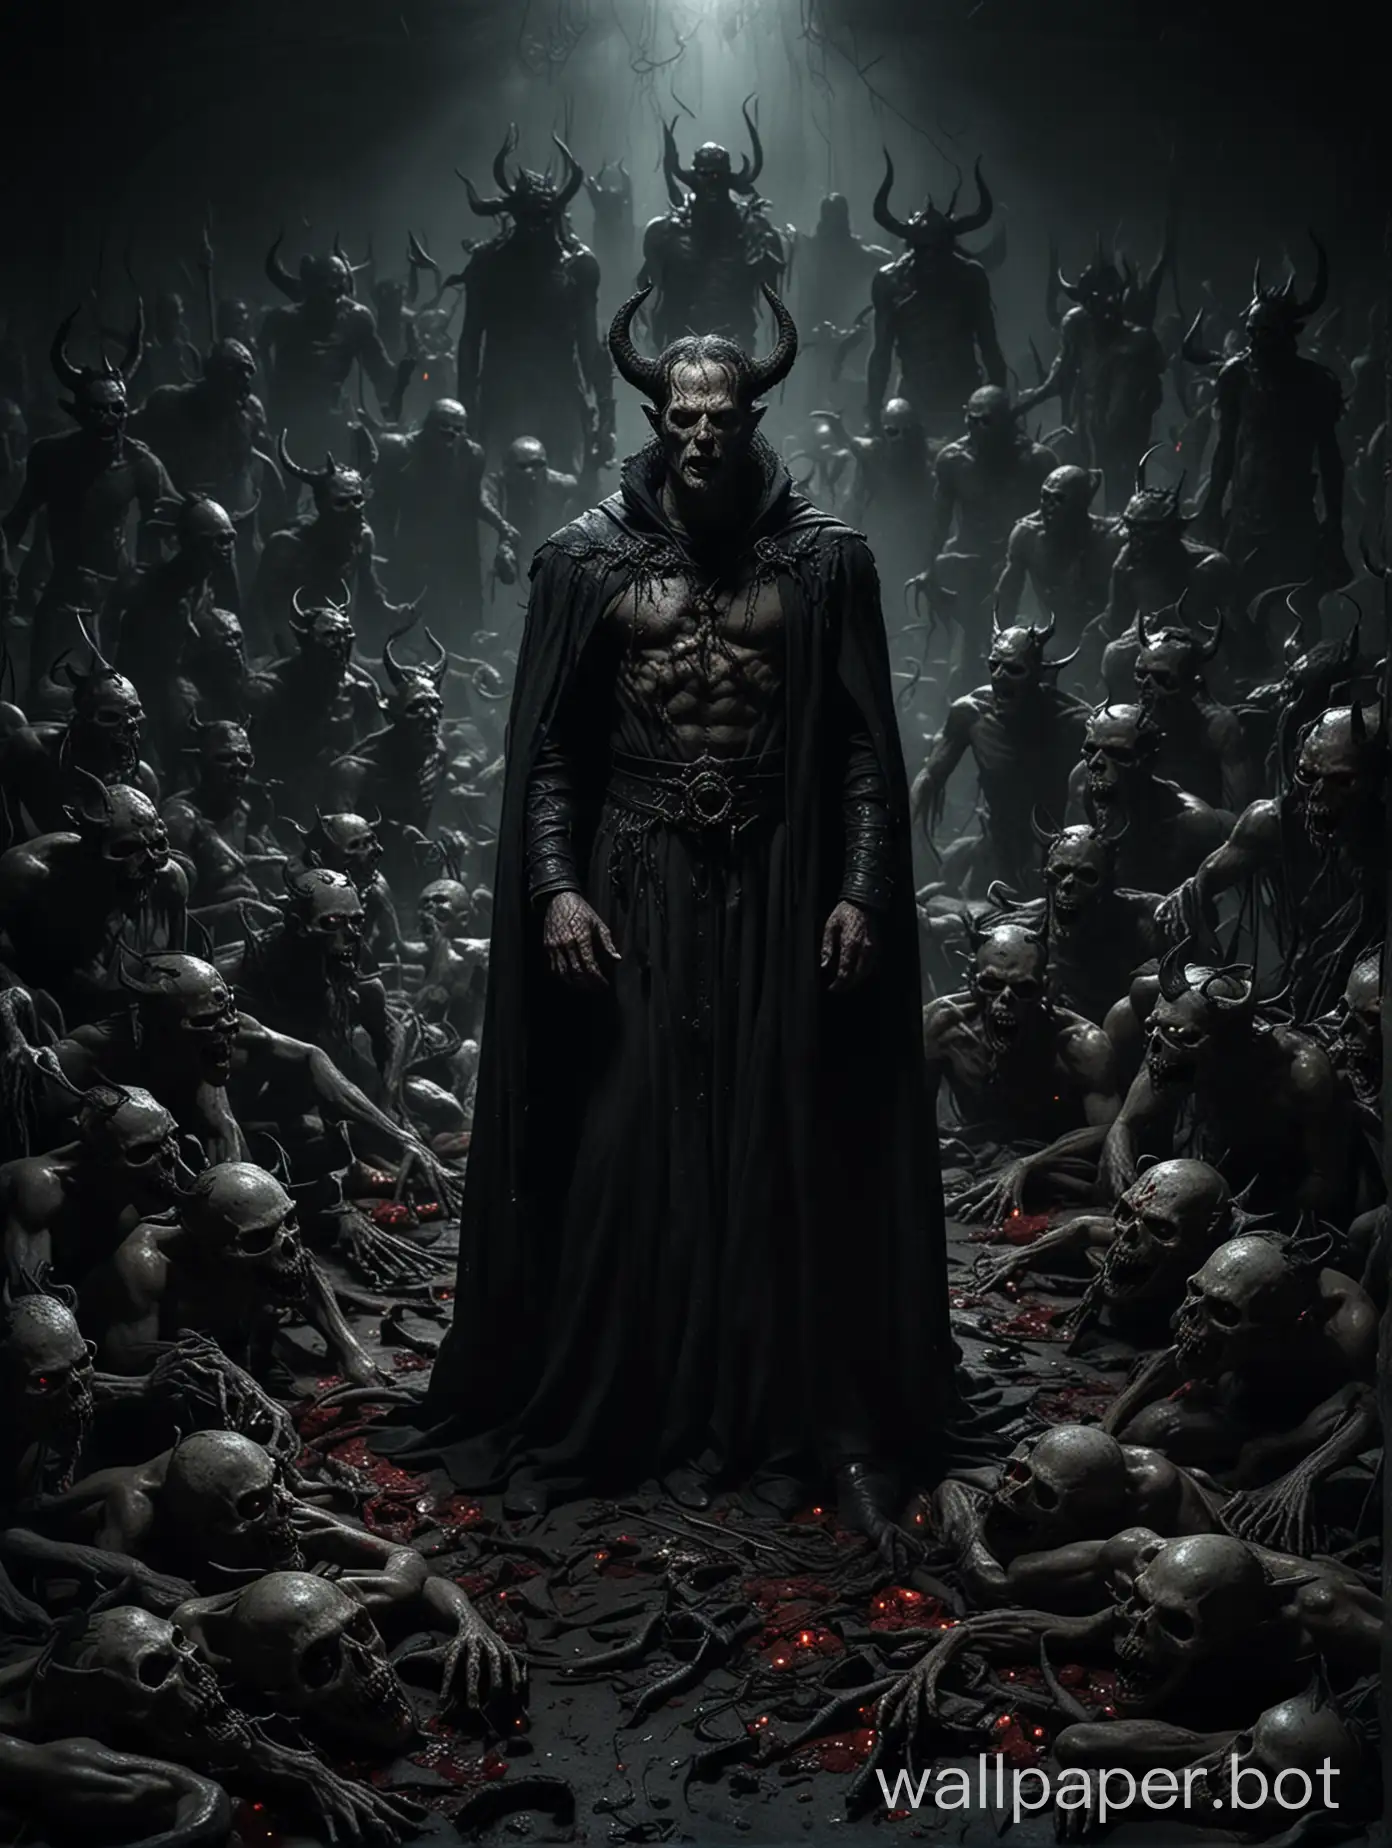 A dramatic illustration of lord of hell in a dark, sinister setting, surrounded by demons and a rotten, dead body. The lighting should be intense, casting eerie shadows and emphasizing the devilish elements